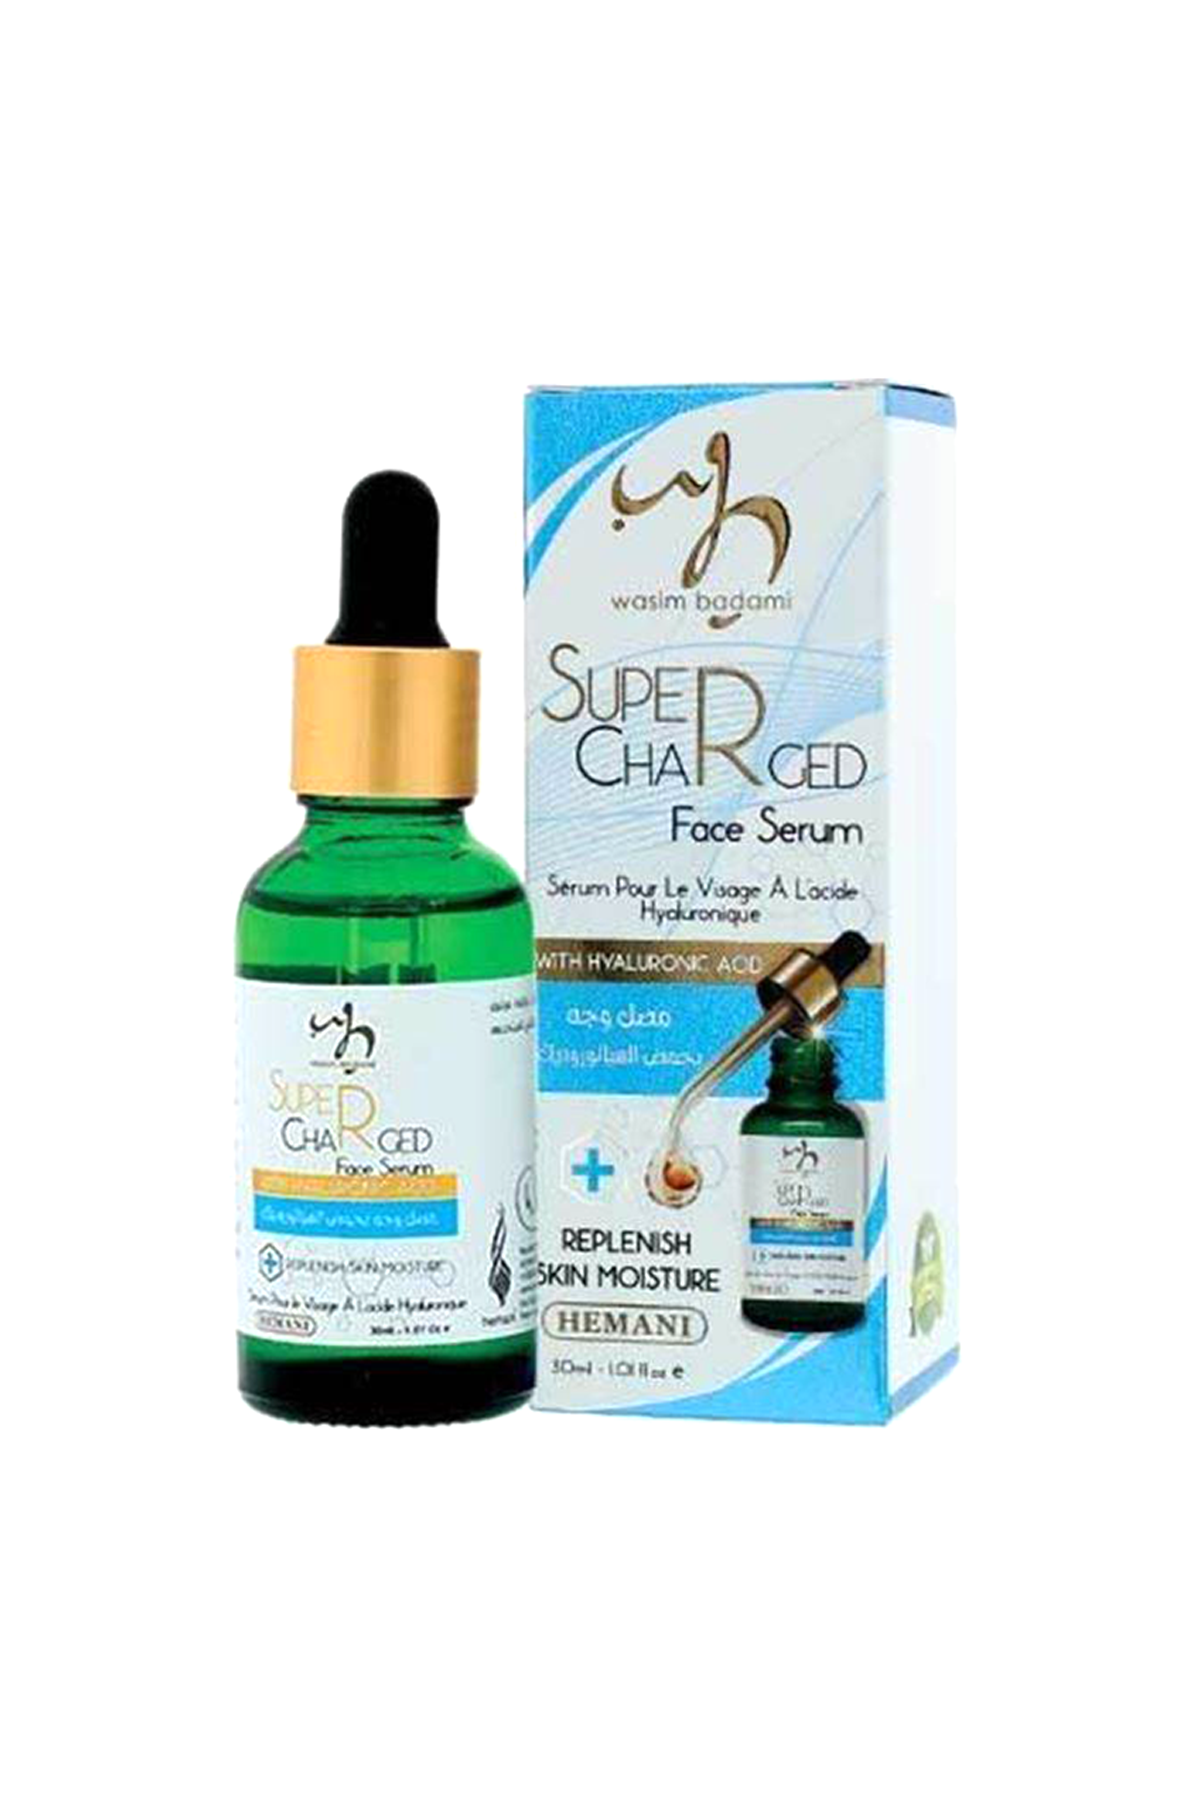 Super Charged Face Serum With Hyaluronic Acid